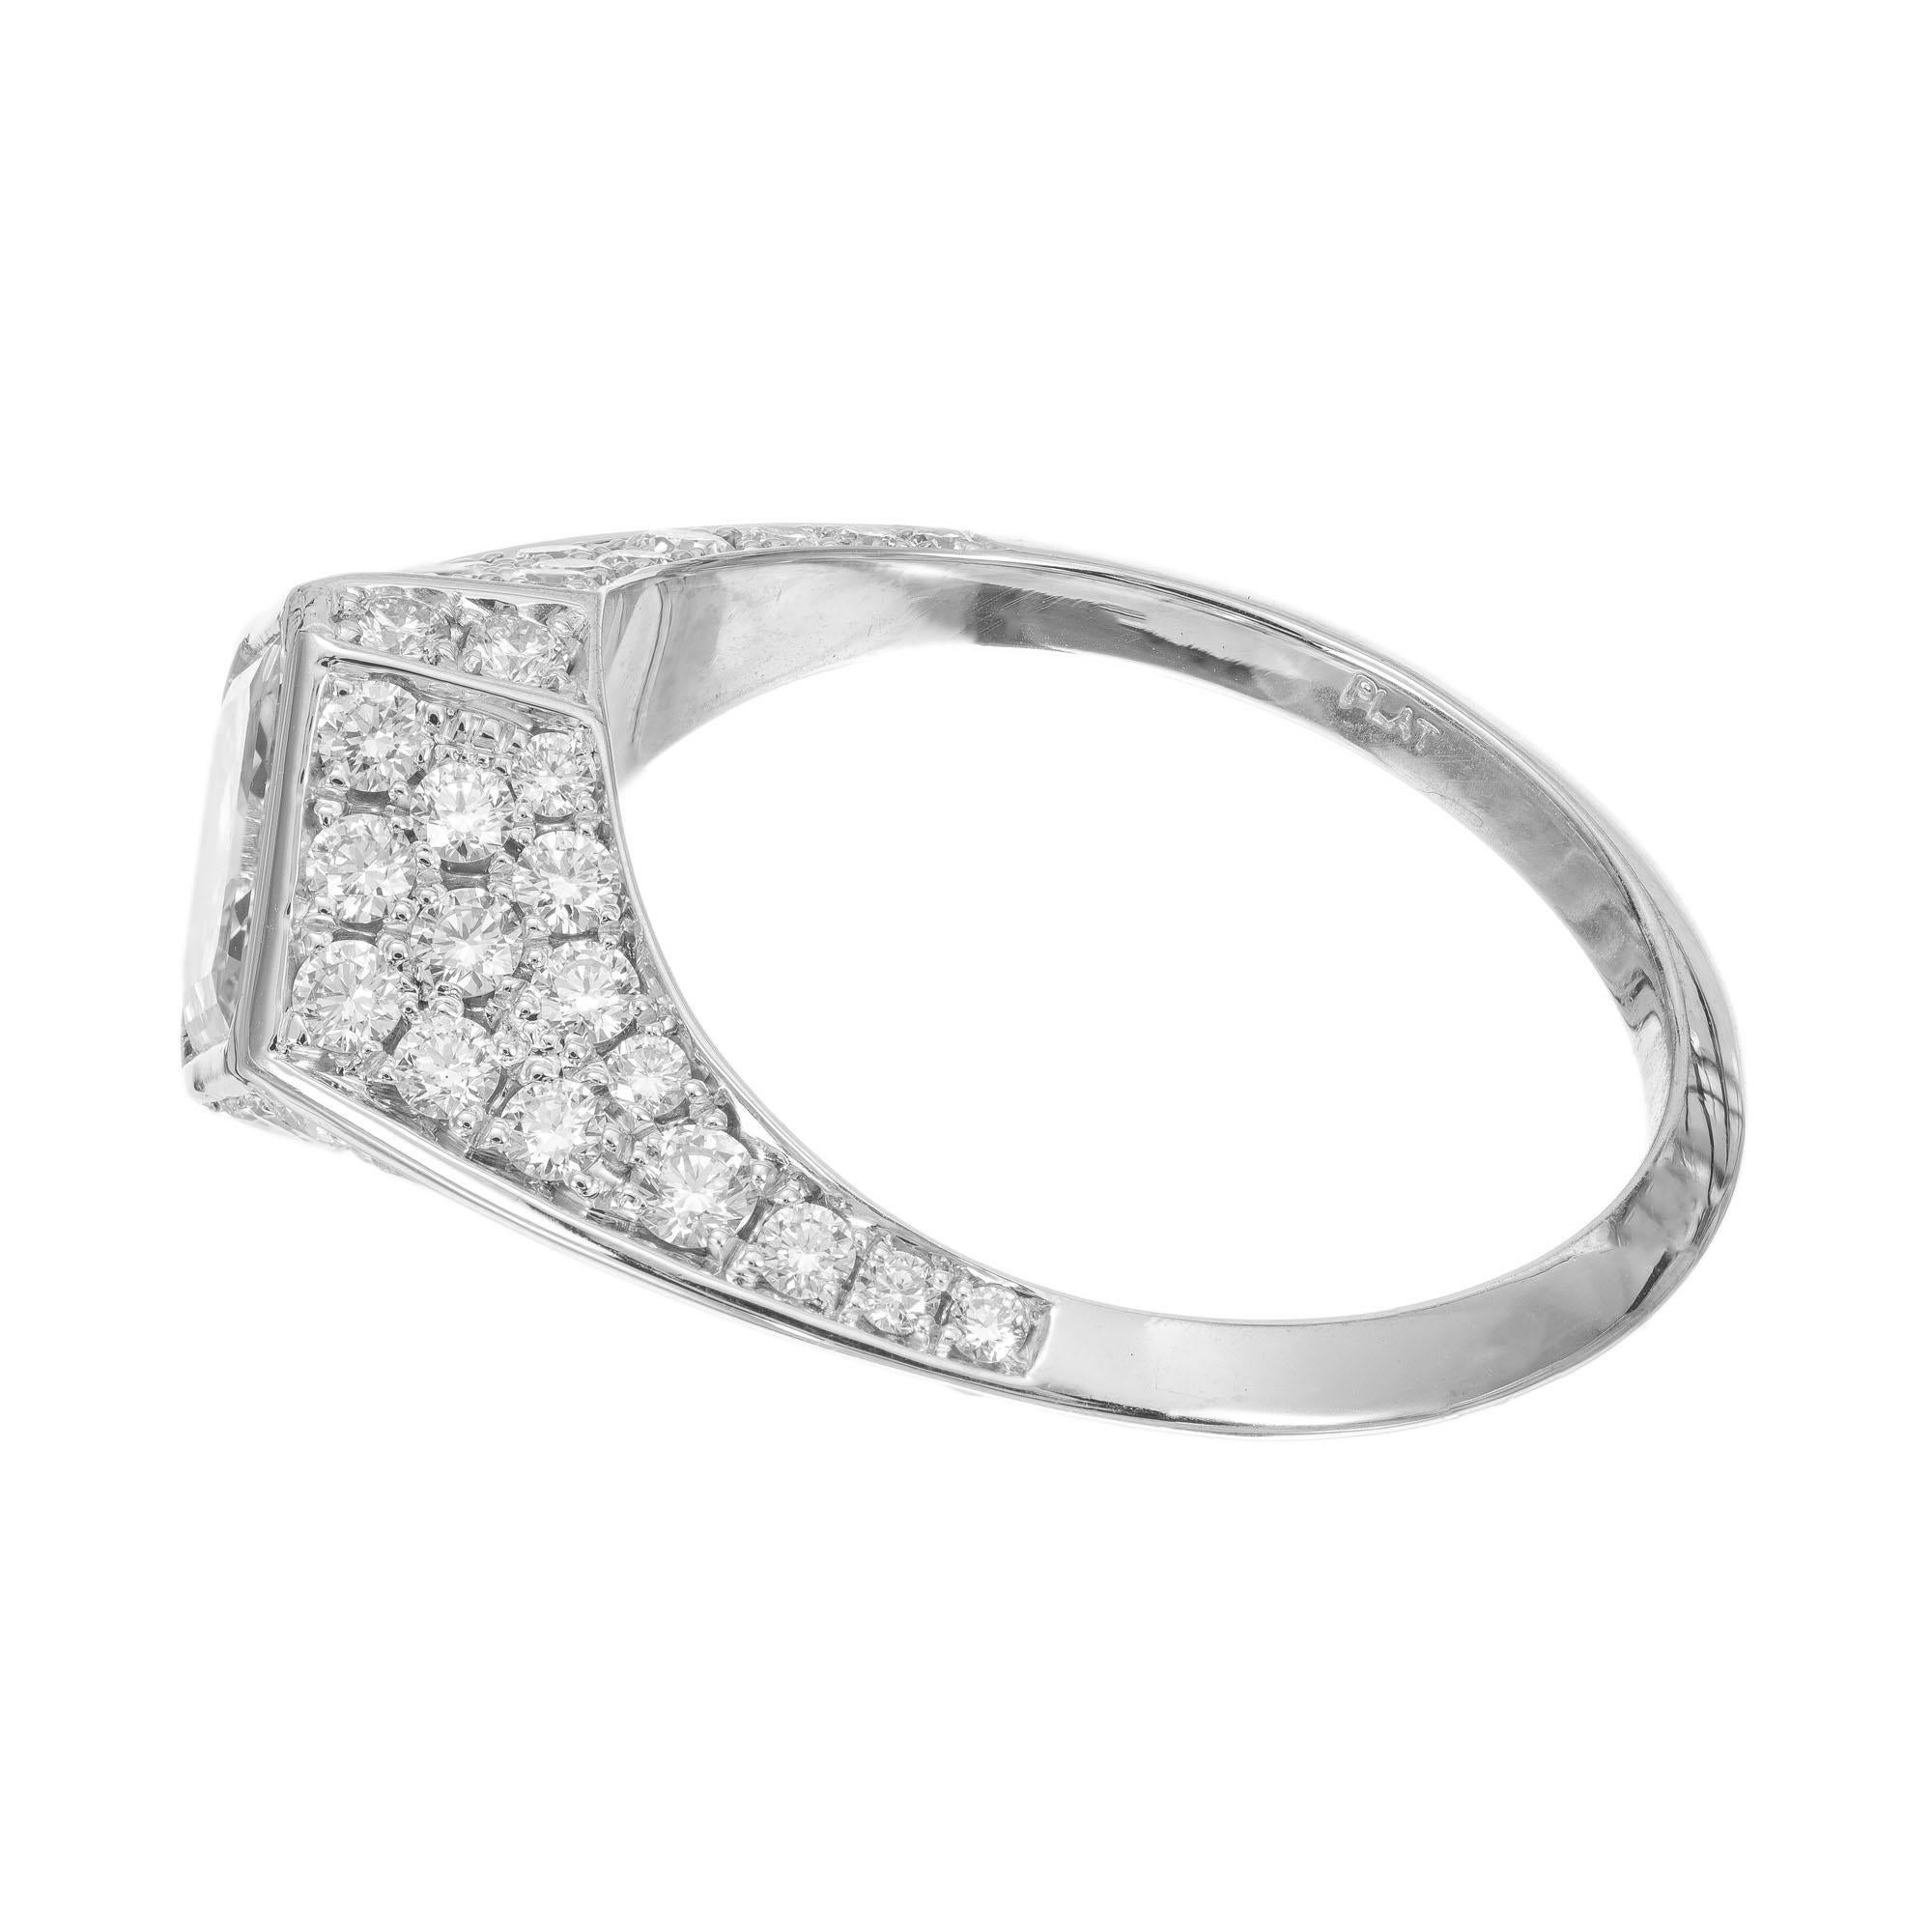 Peter Suchy GIA Certified 1.41 Carat Diamond Platinum Engagement Ring In New Condition For Sale In Stamford, CT